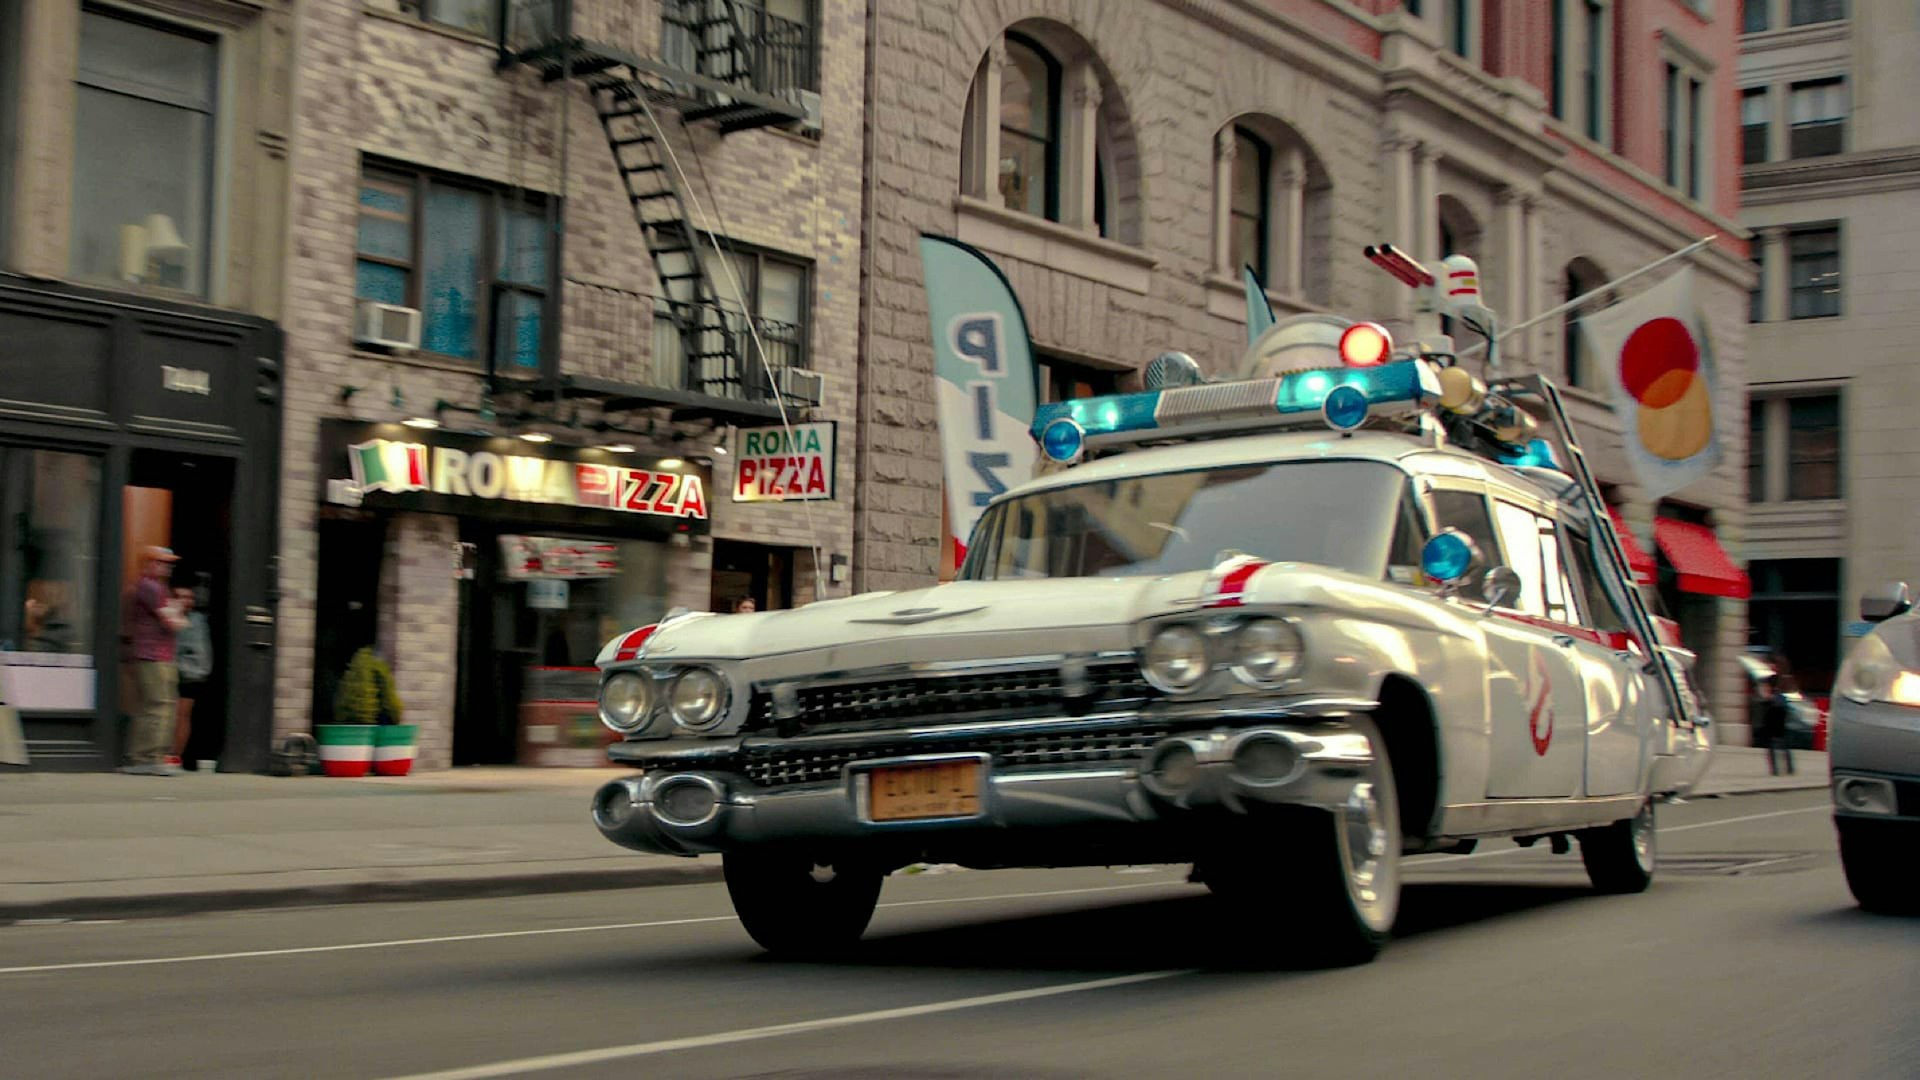 A vehicle resembling a police car but with extra lights and guns mounted on the roof speeds through a city street